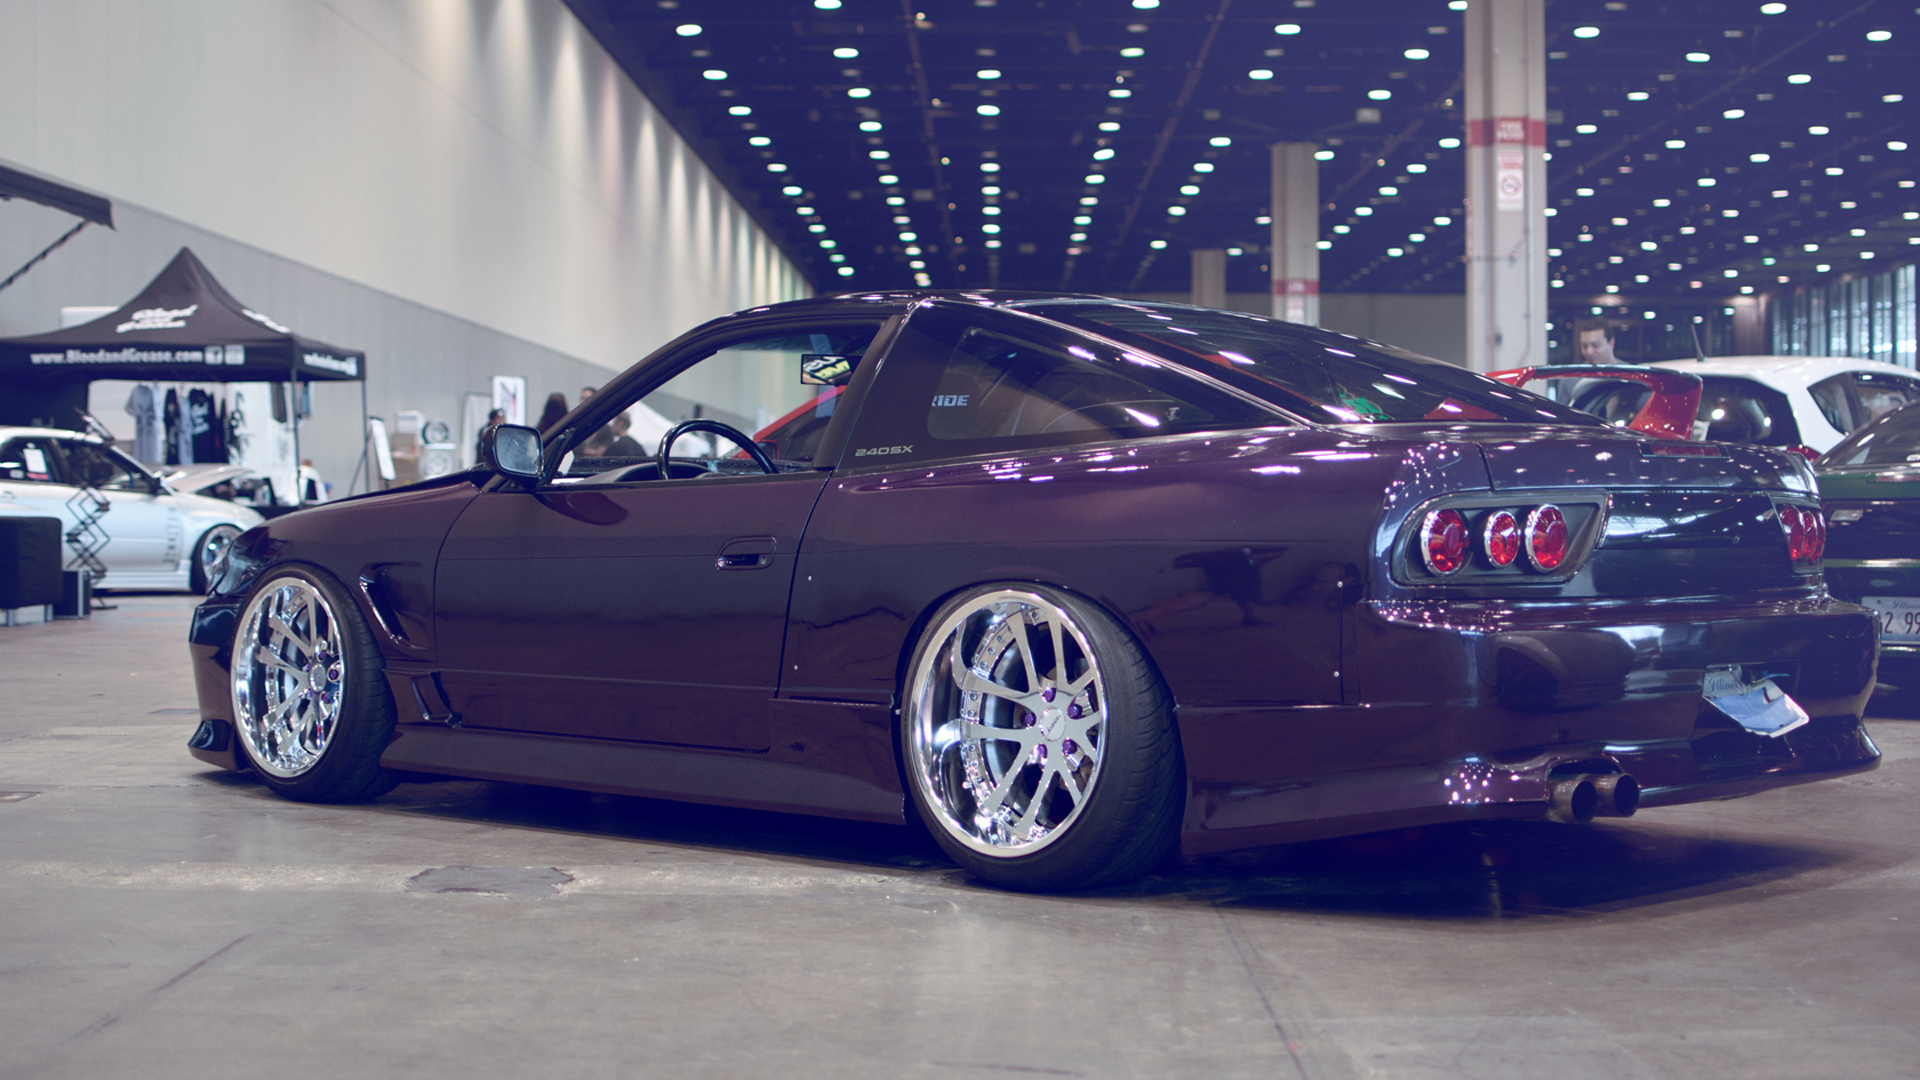 240sx nissan tuning wallpaper background